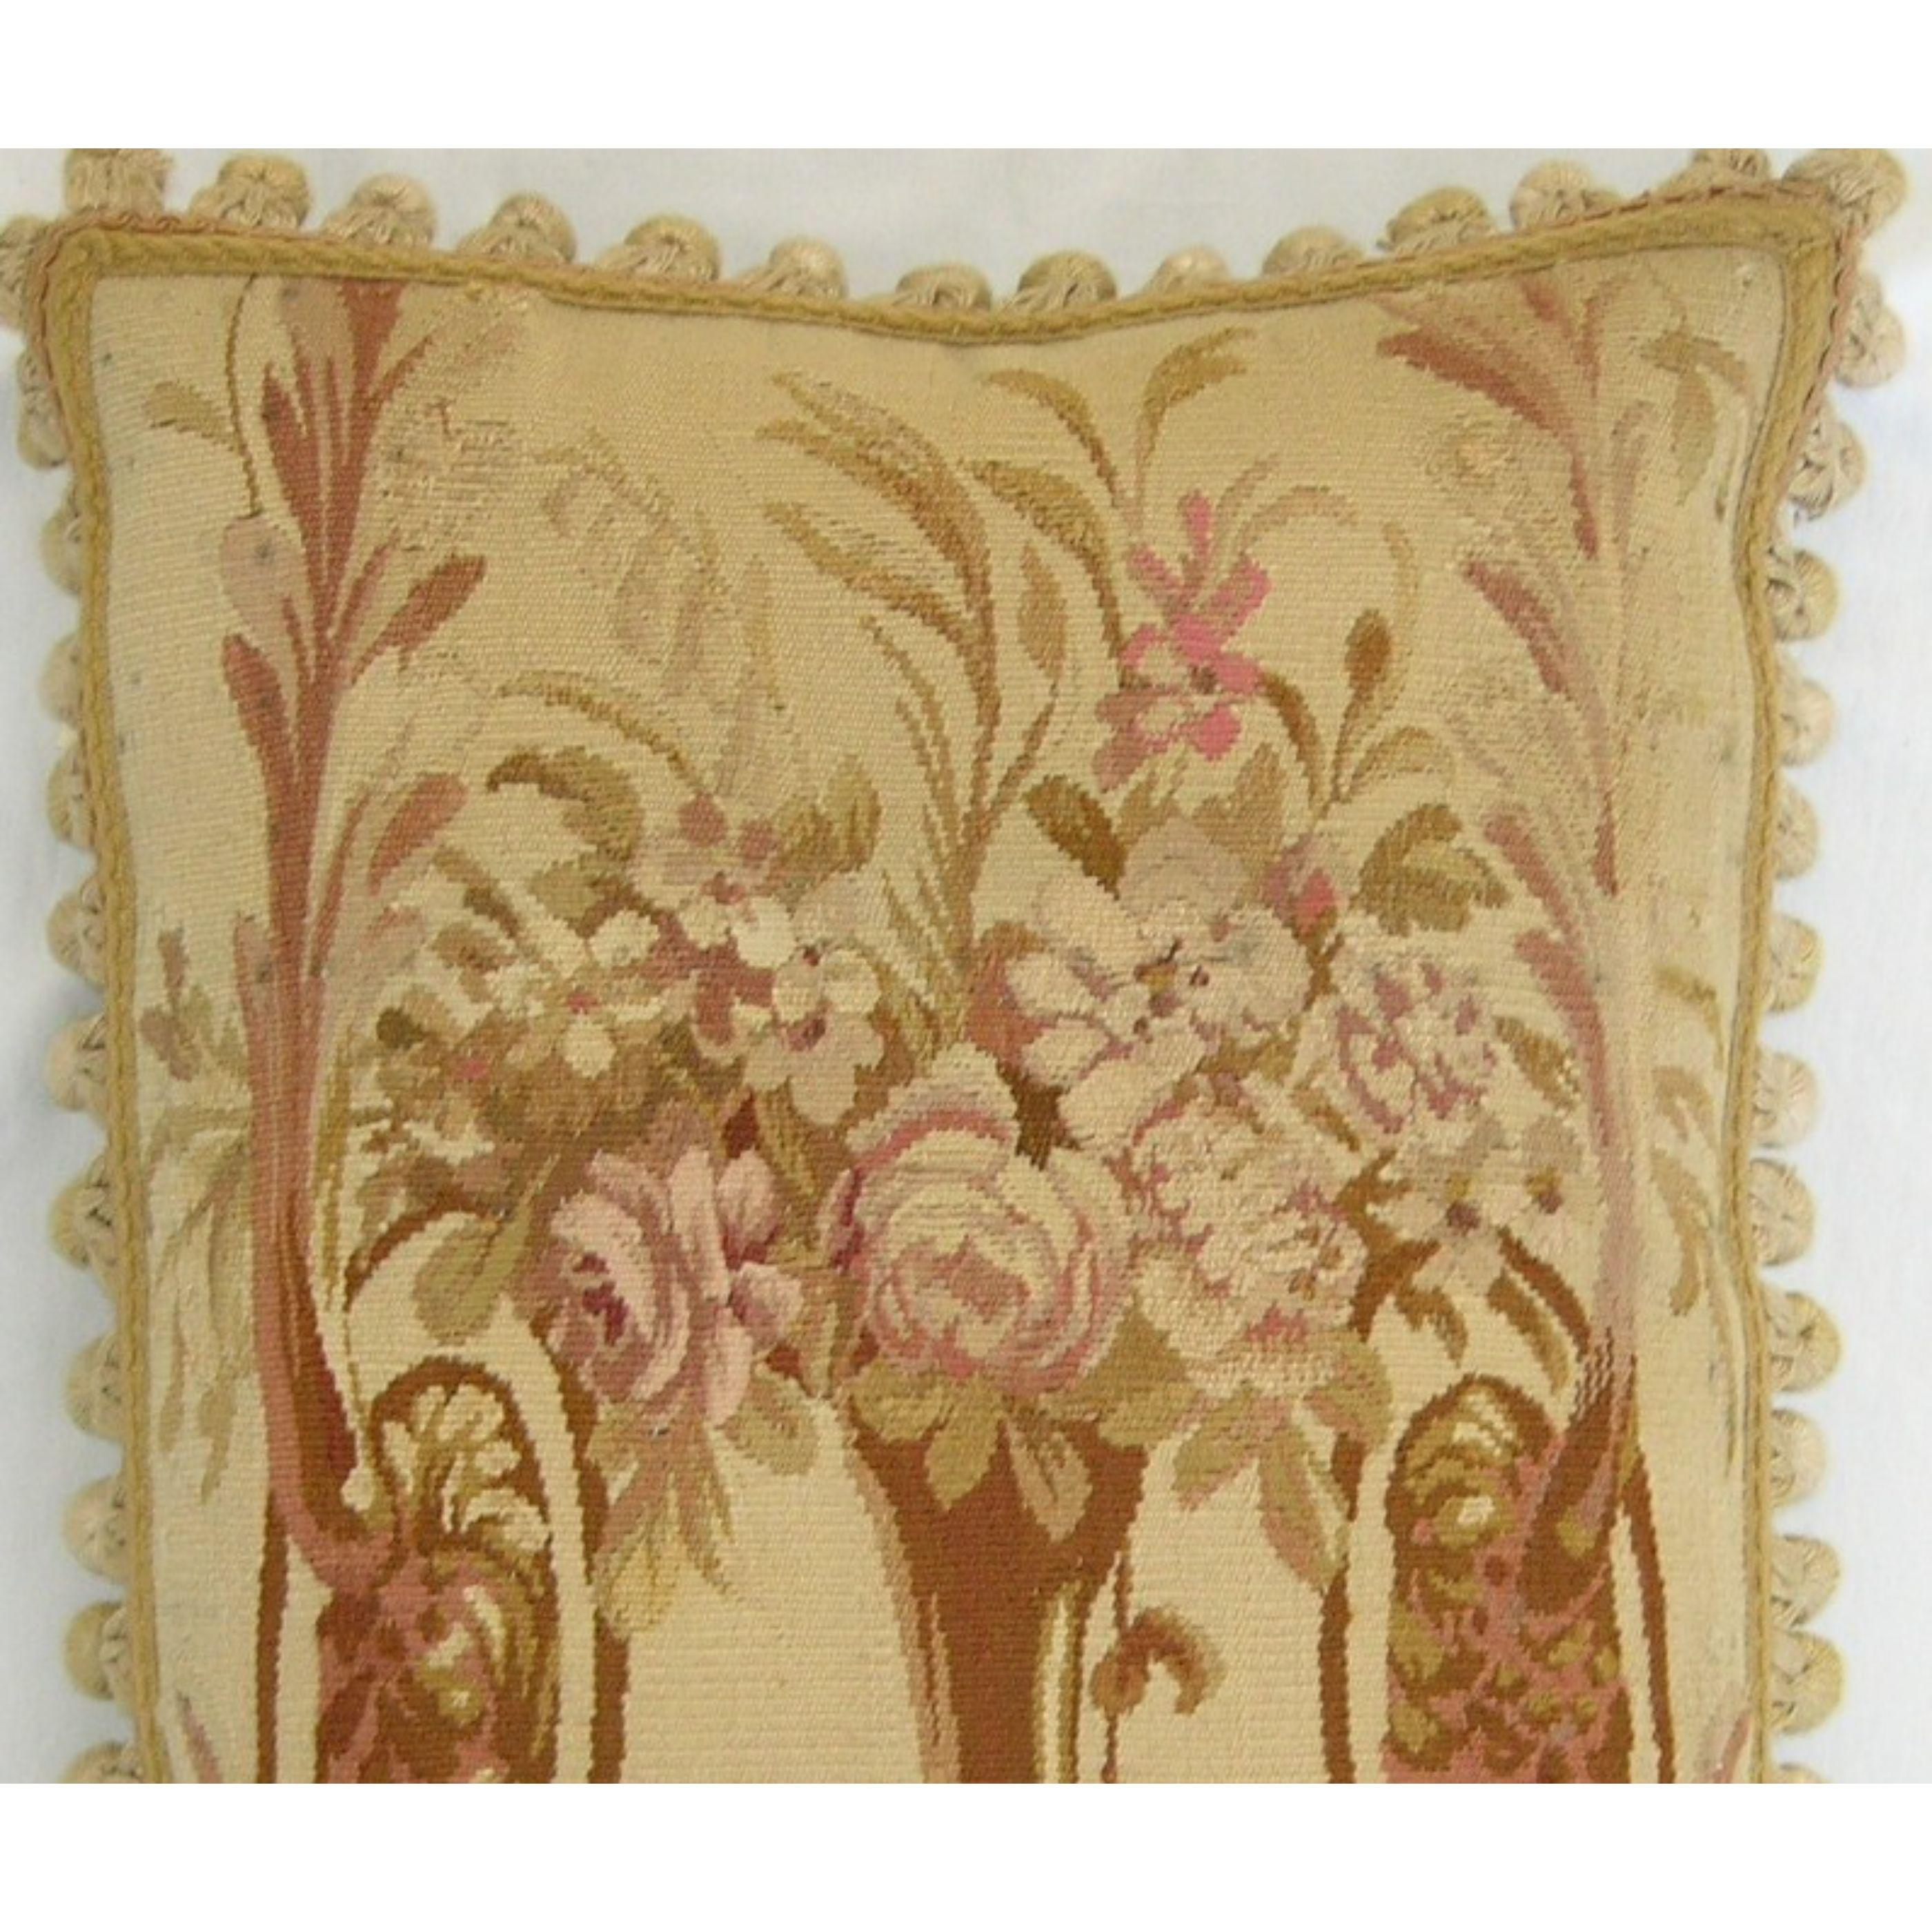 Circa 1870 Antique French Aubusson Tapestry Pillow In Good Condition For Sale In Los Angeles, US